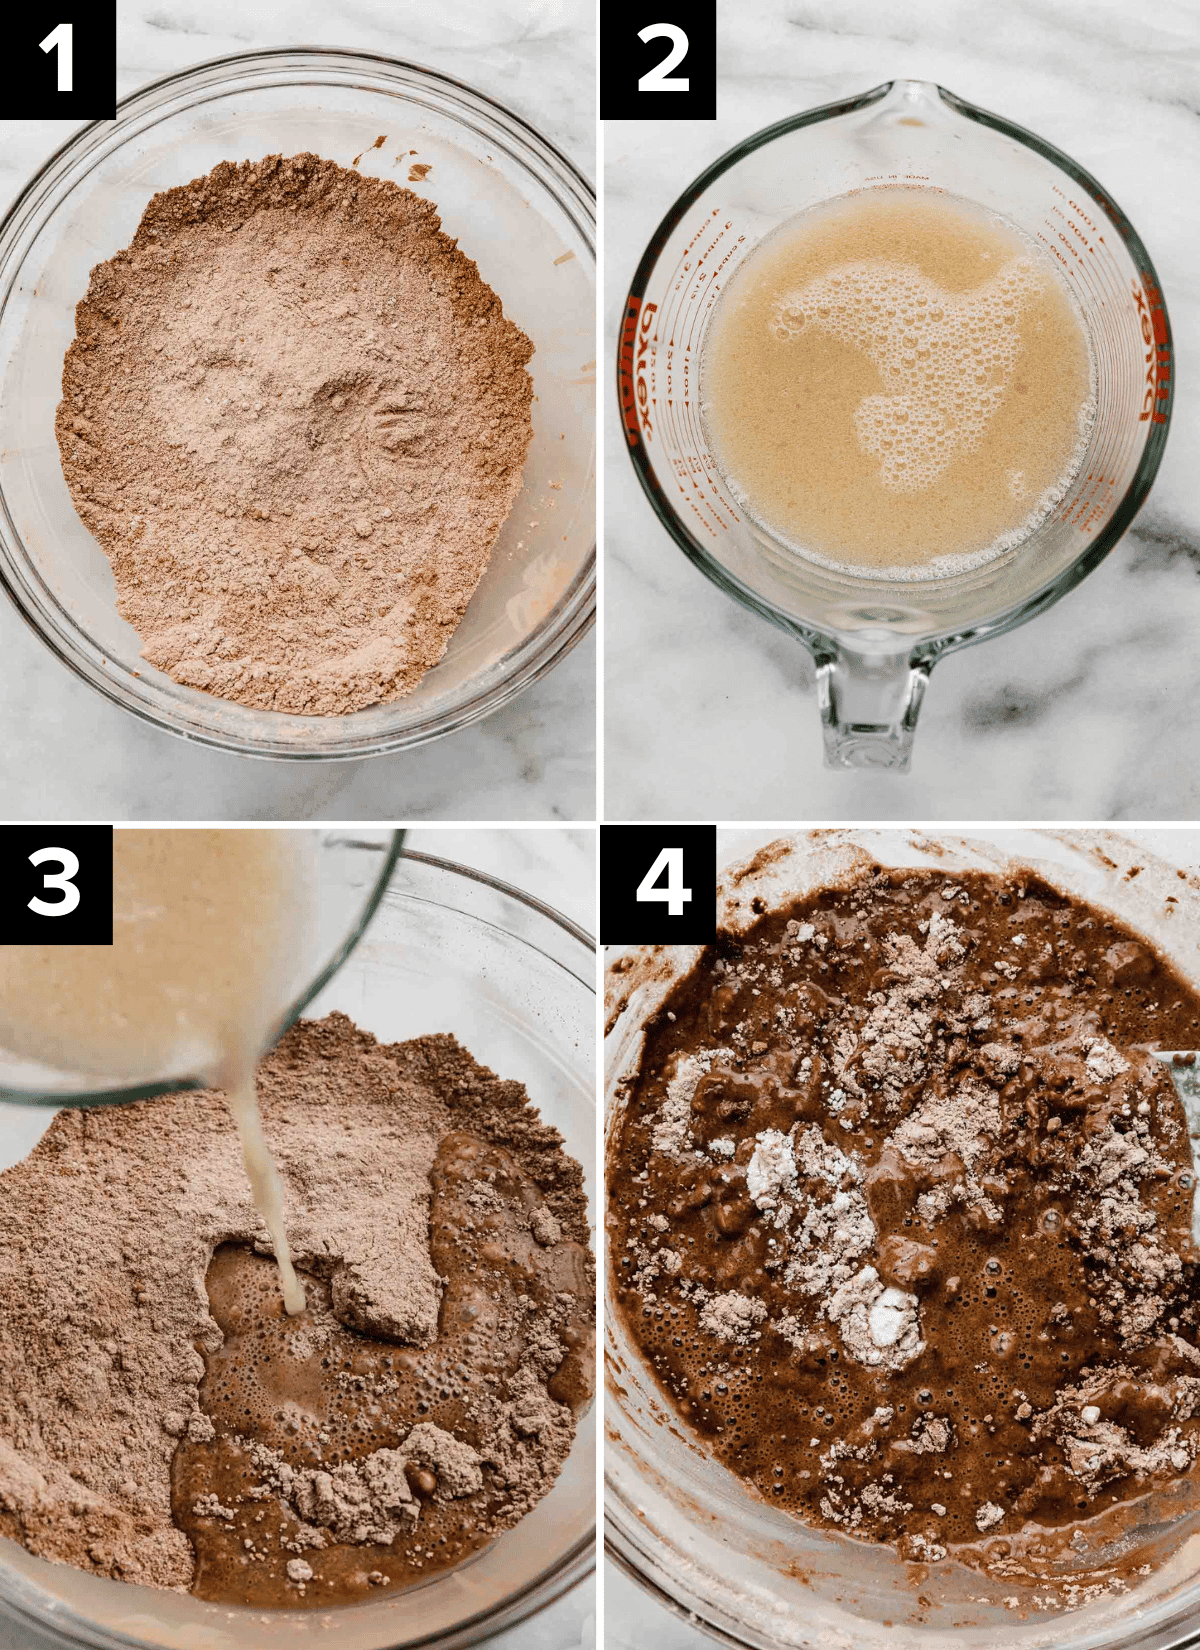 Four images showing how to make chocolate cupcake batter to make Reese's cupcakes.